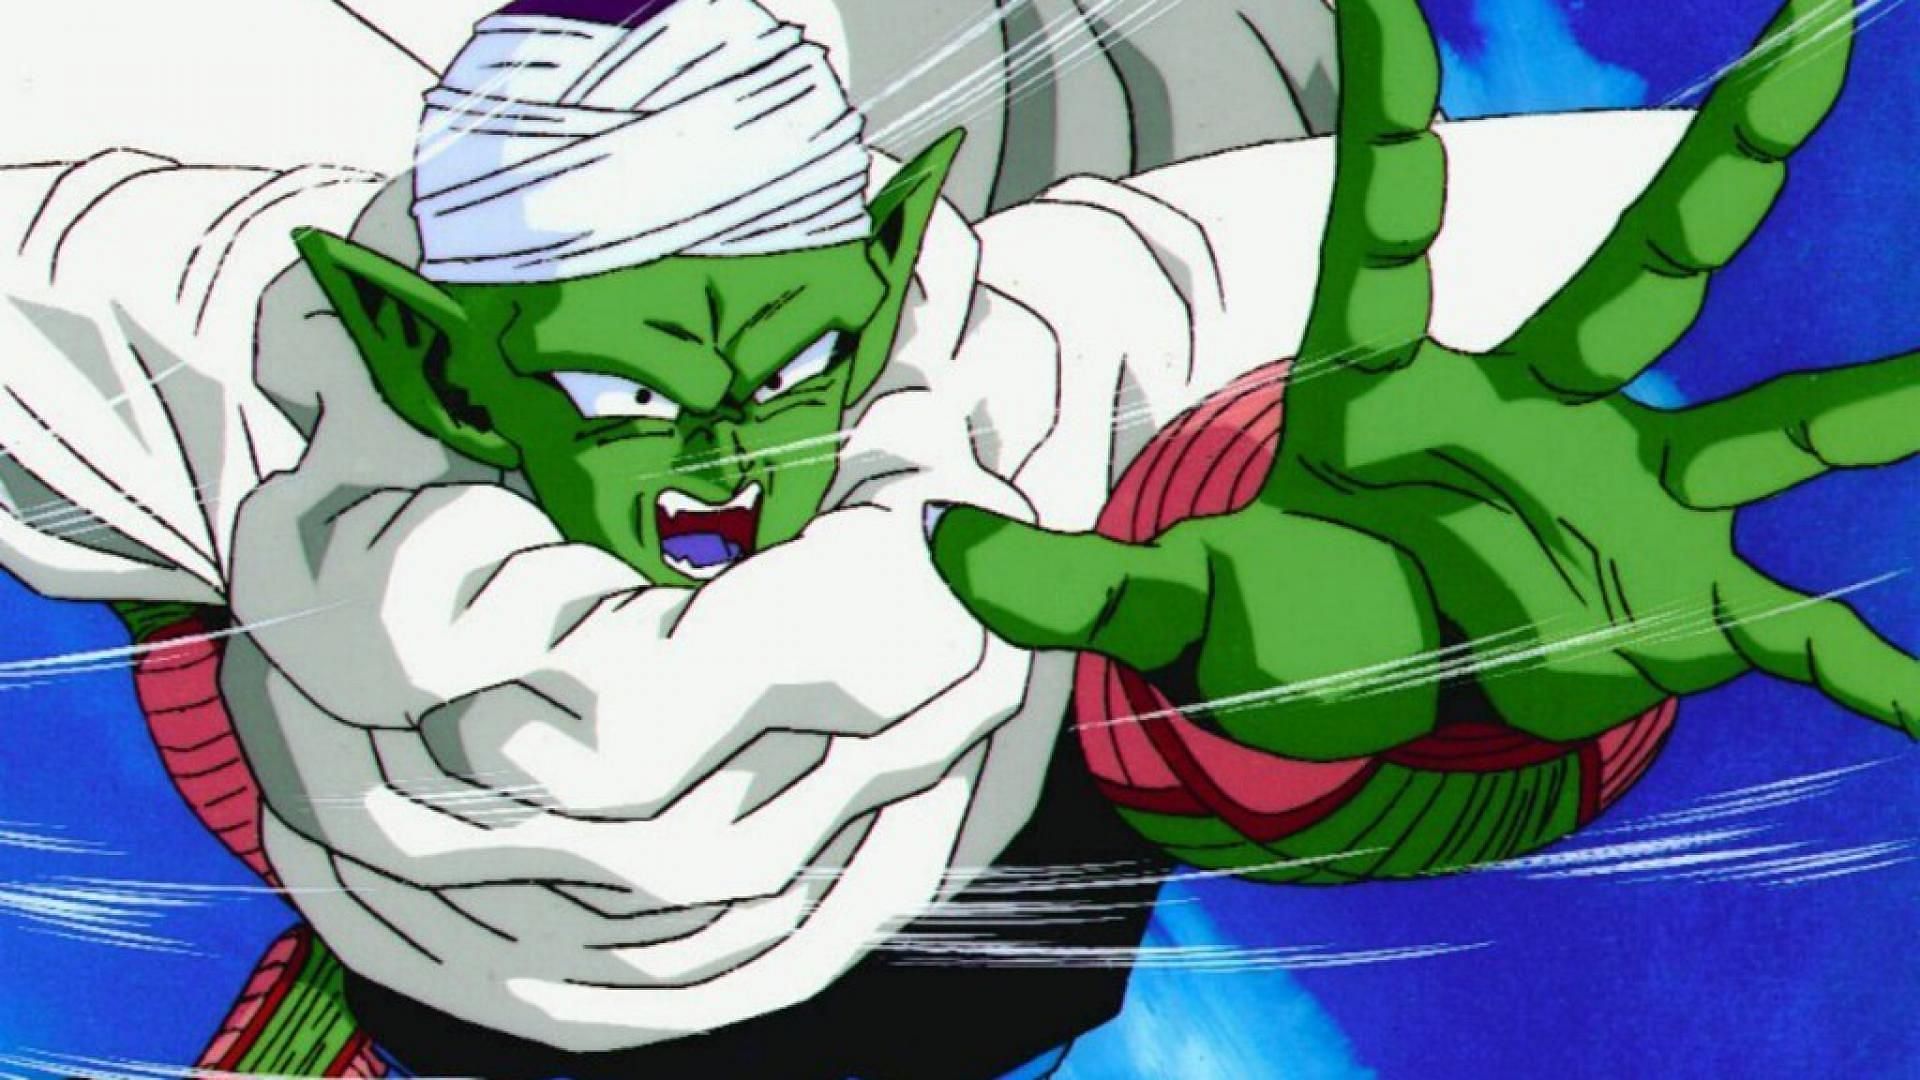 Dragon Ball Super: Super Hero Teases New Forms For Gohan and Piccolo